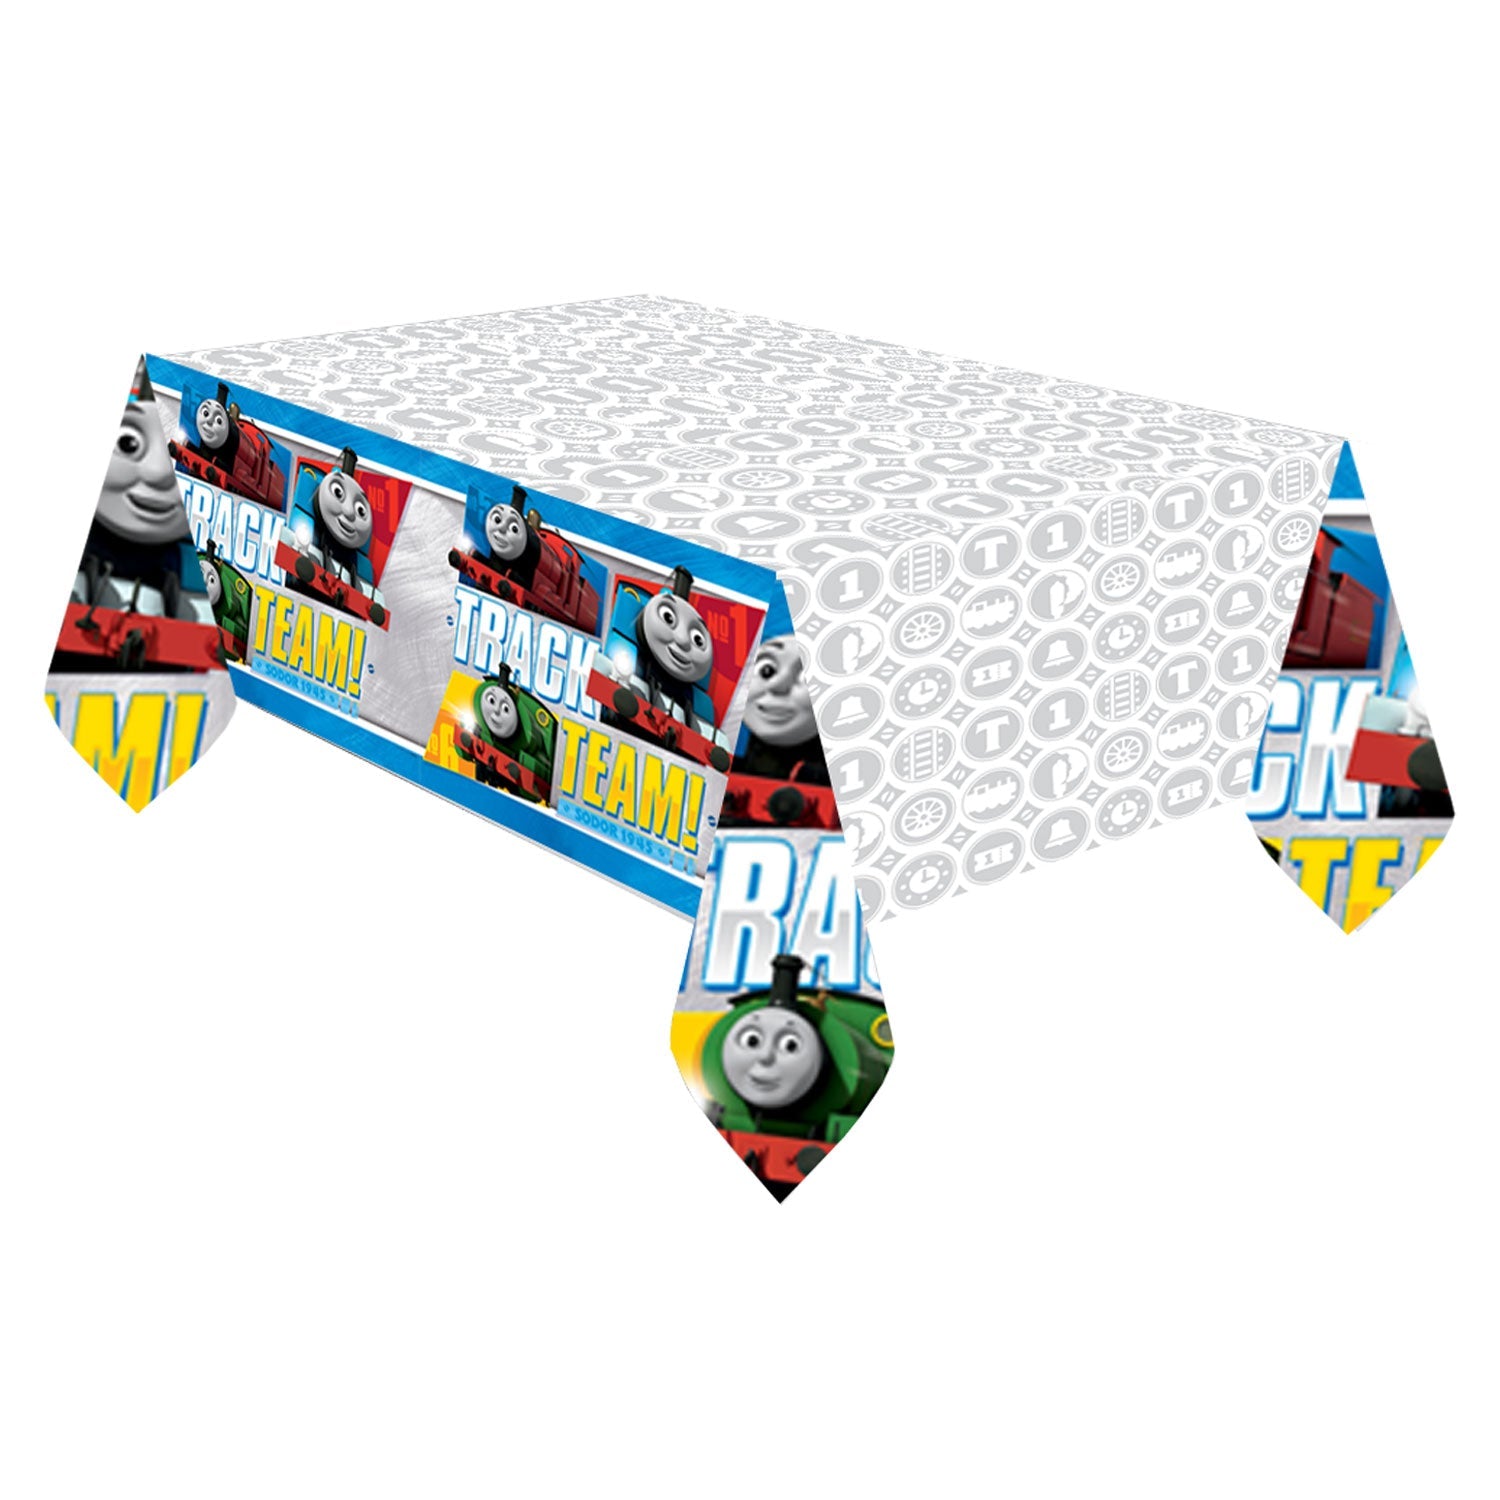 Thomas Tank Engine Table cover